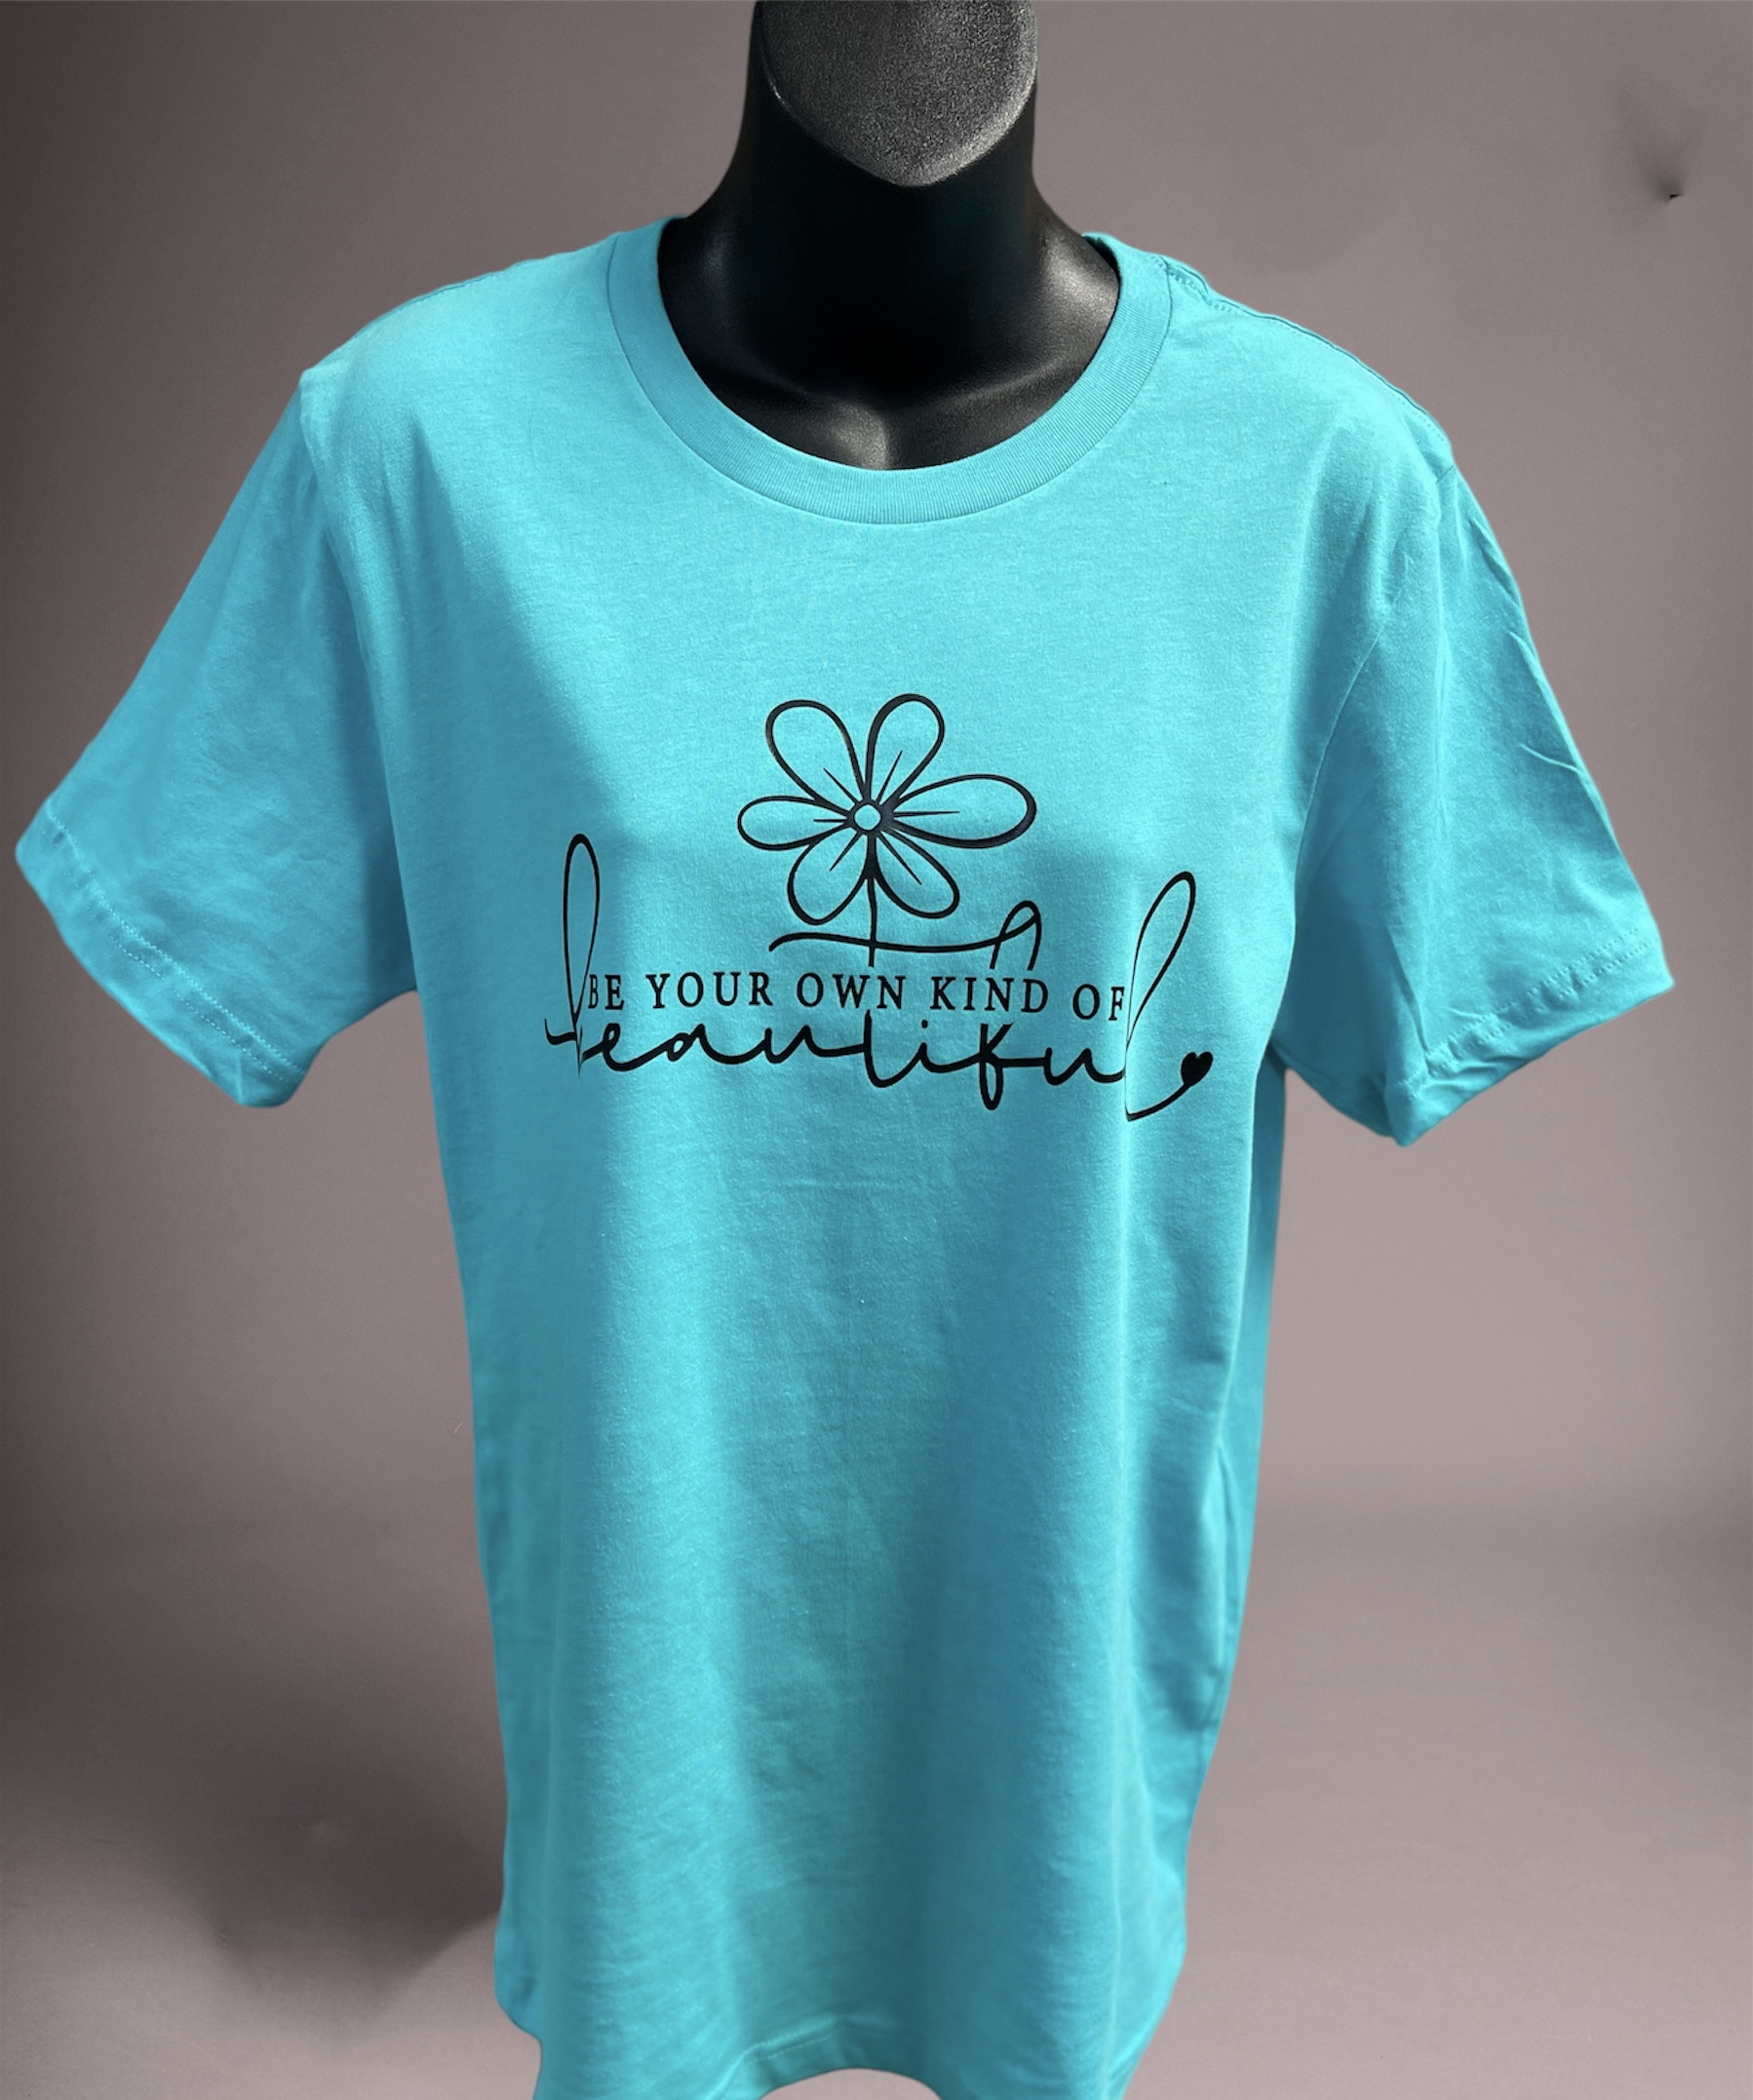 Be Your Own Kind of Beautiful Teal Shirt - Launch 0224